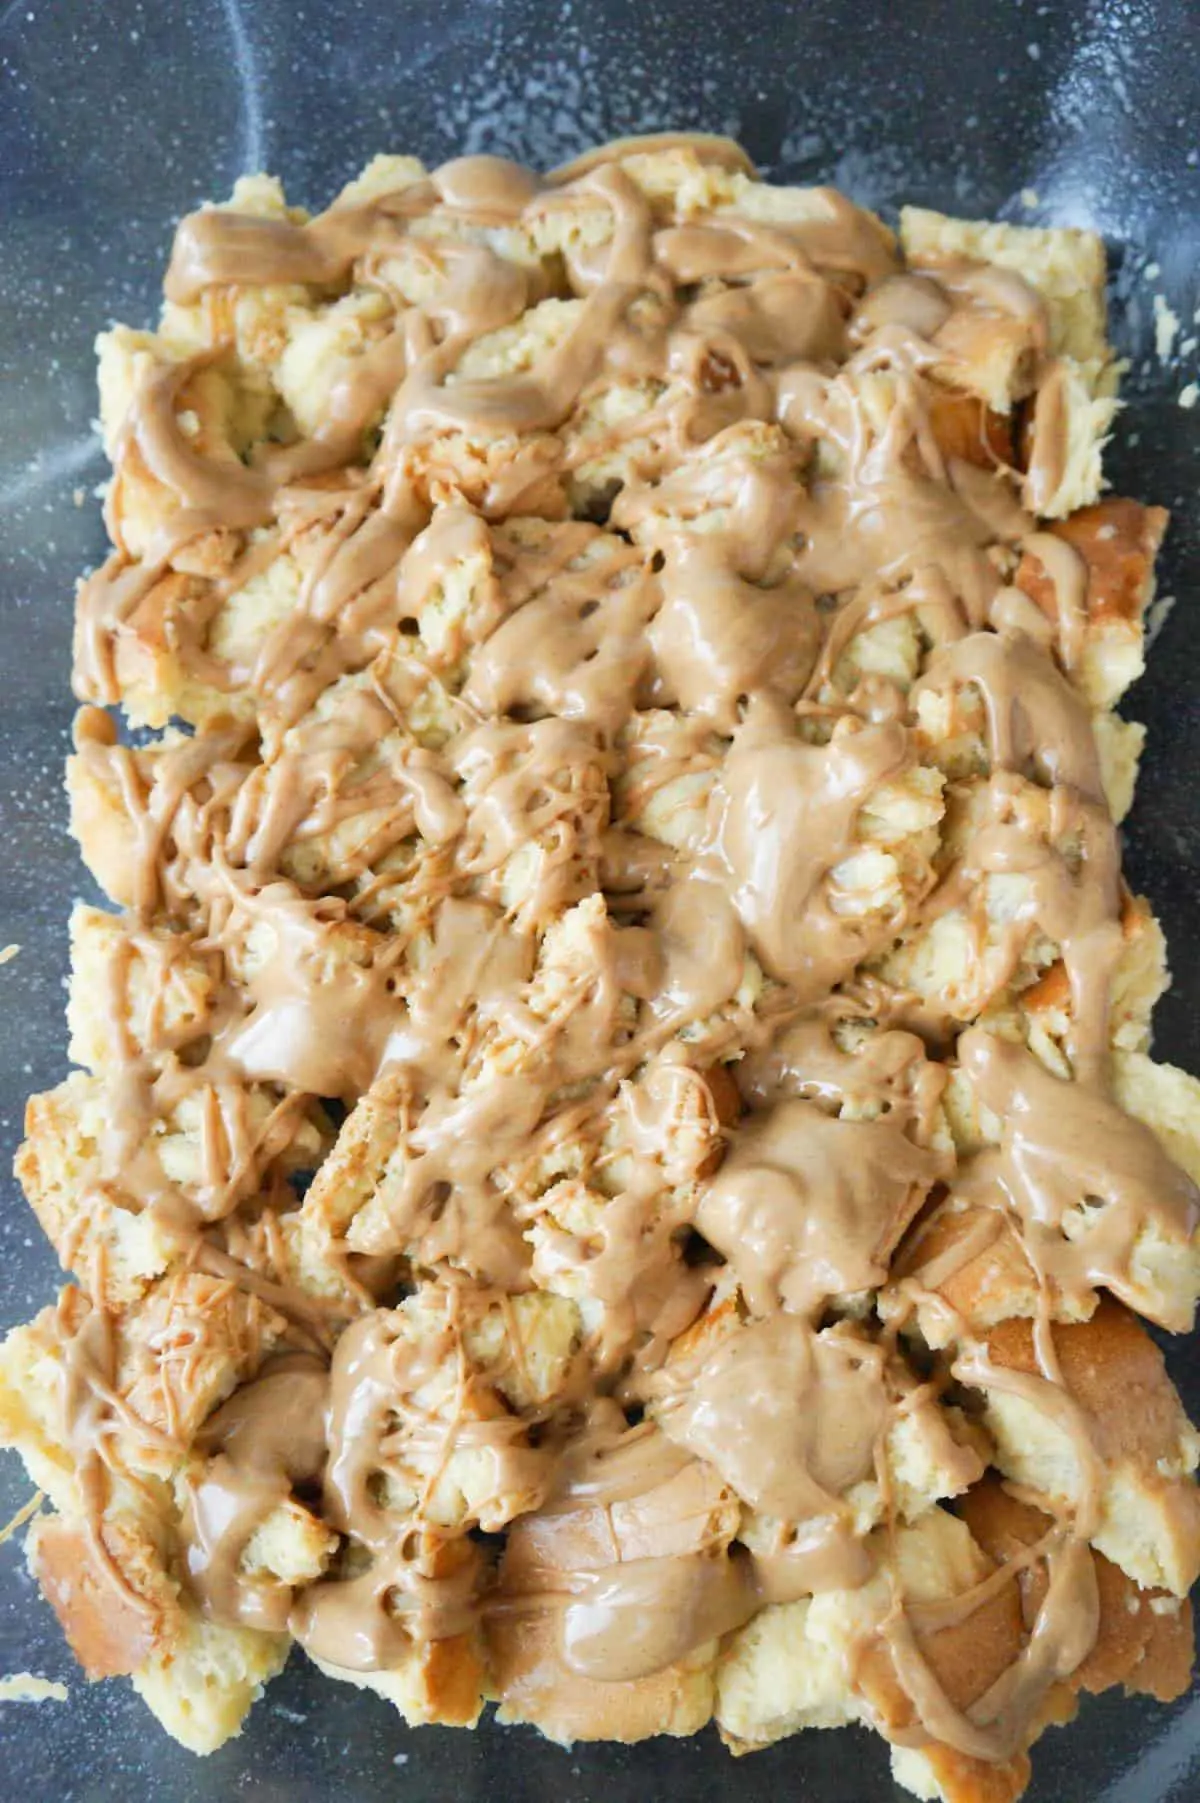 peanut butter drizzled over cubed bread in a baking dish